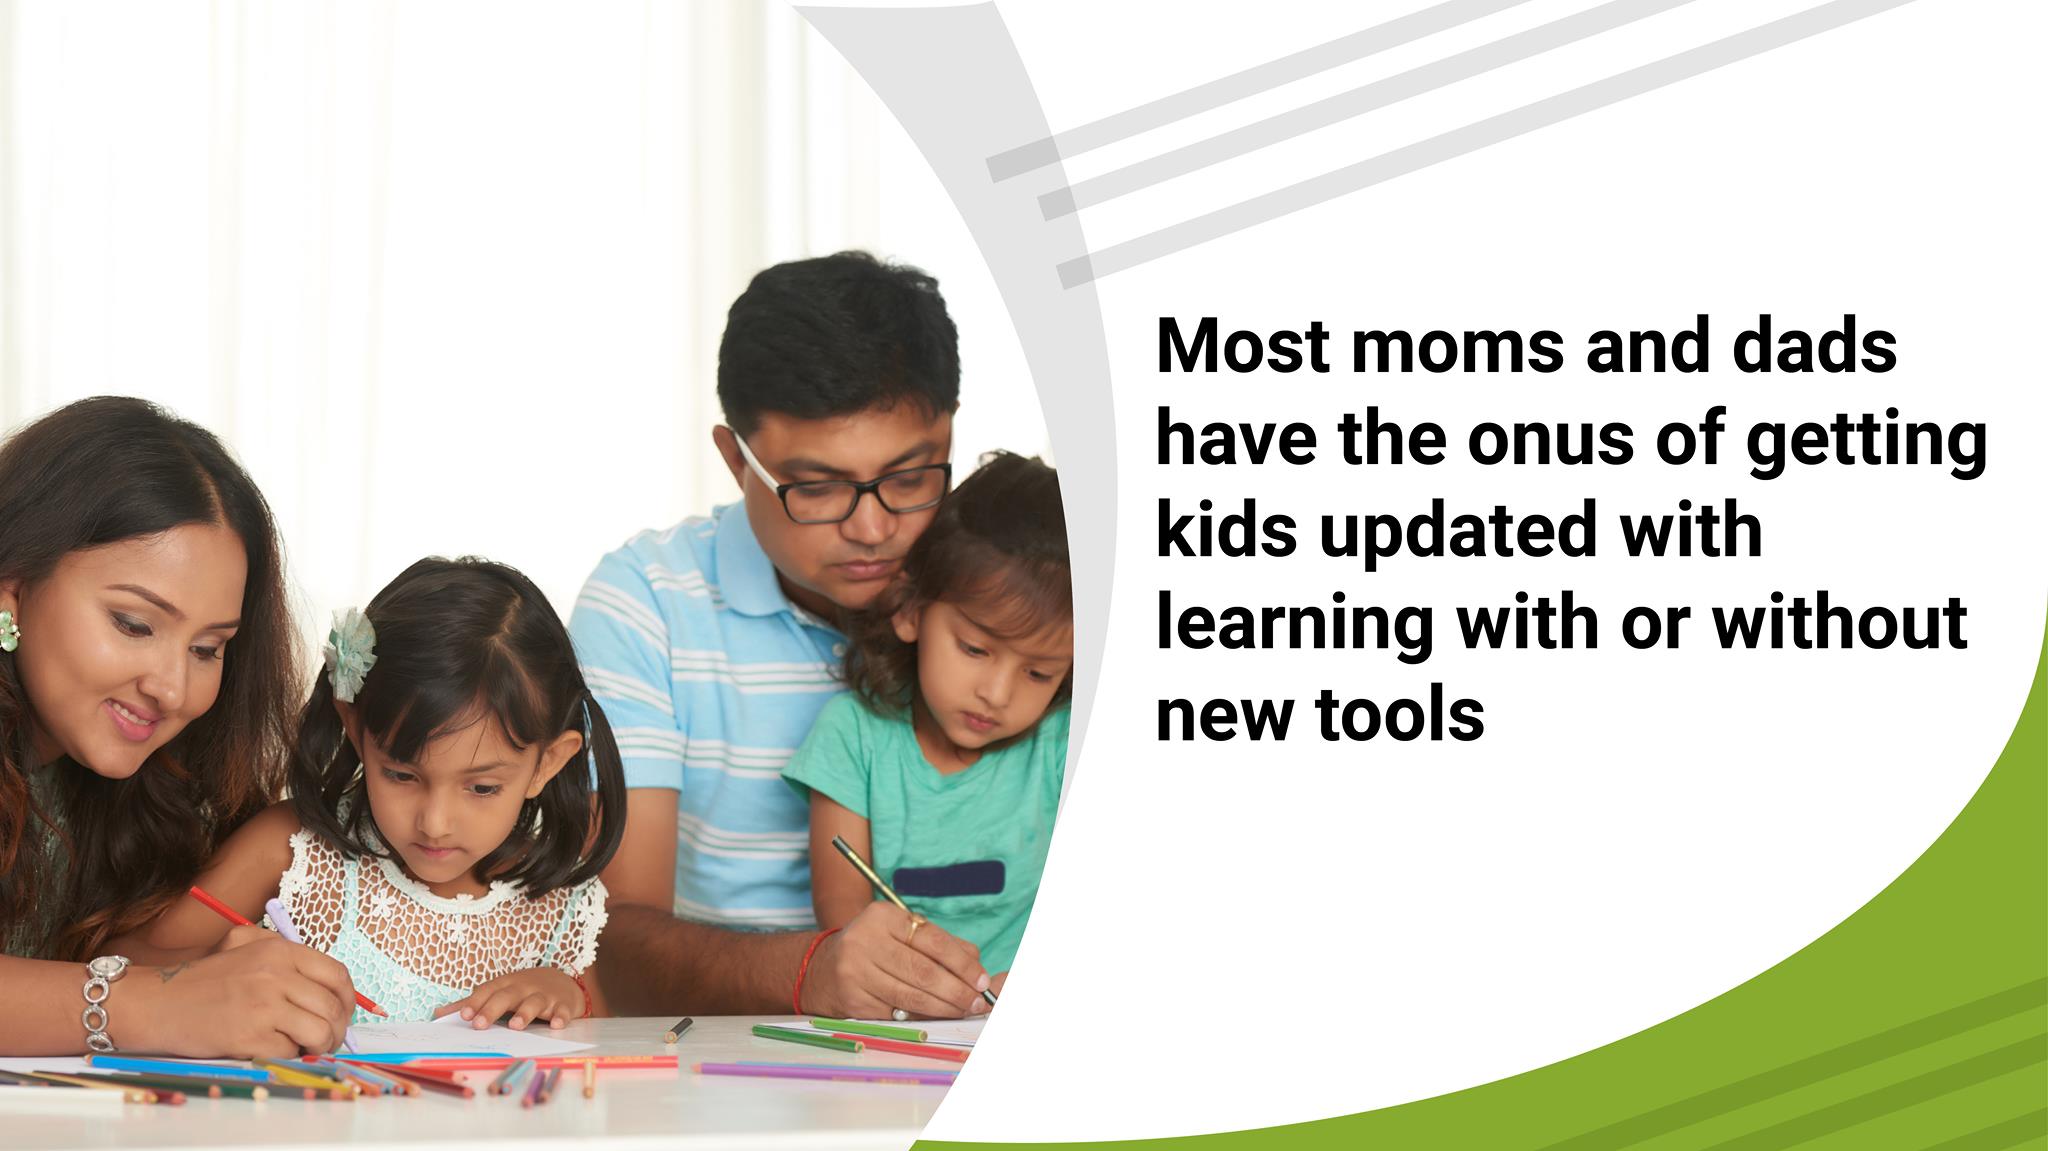 Most moms and dads have the onus of getting kids updated with learning with or without new tools